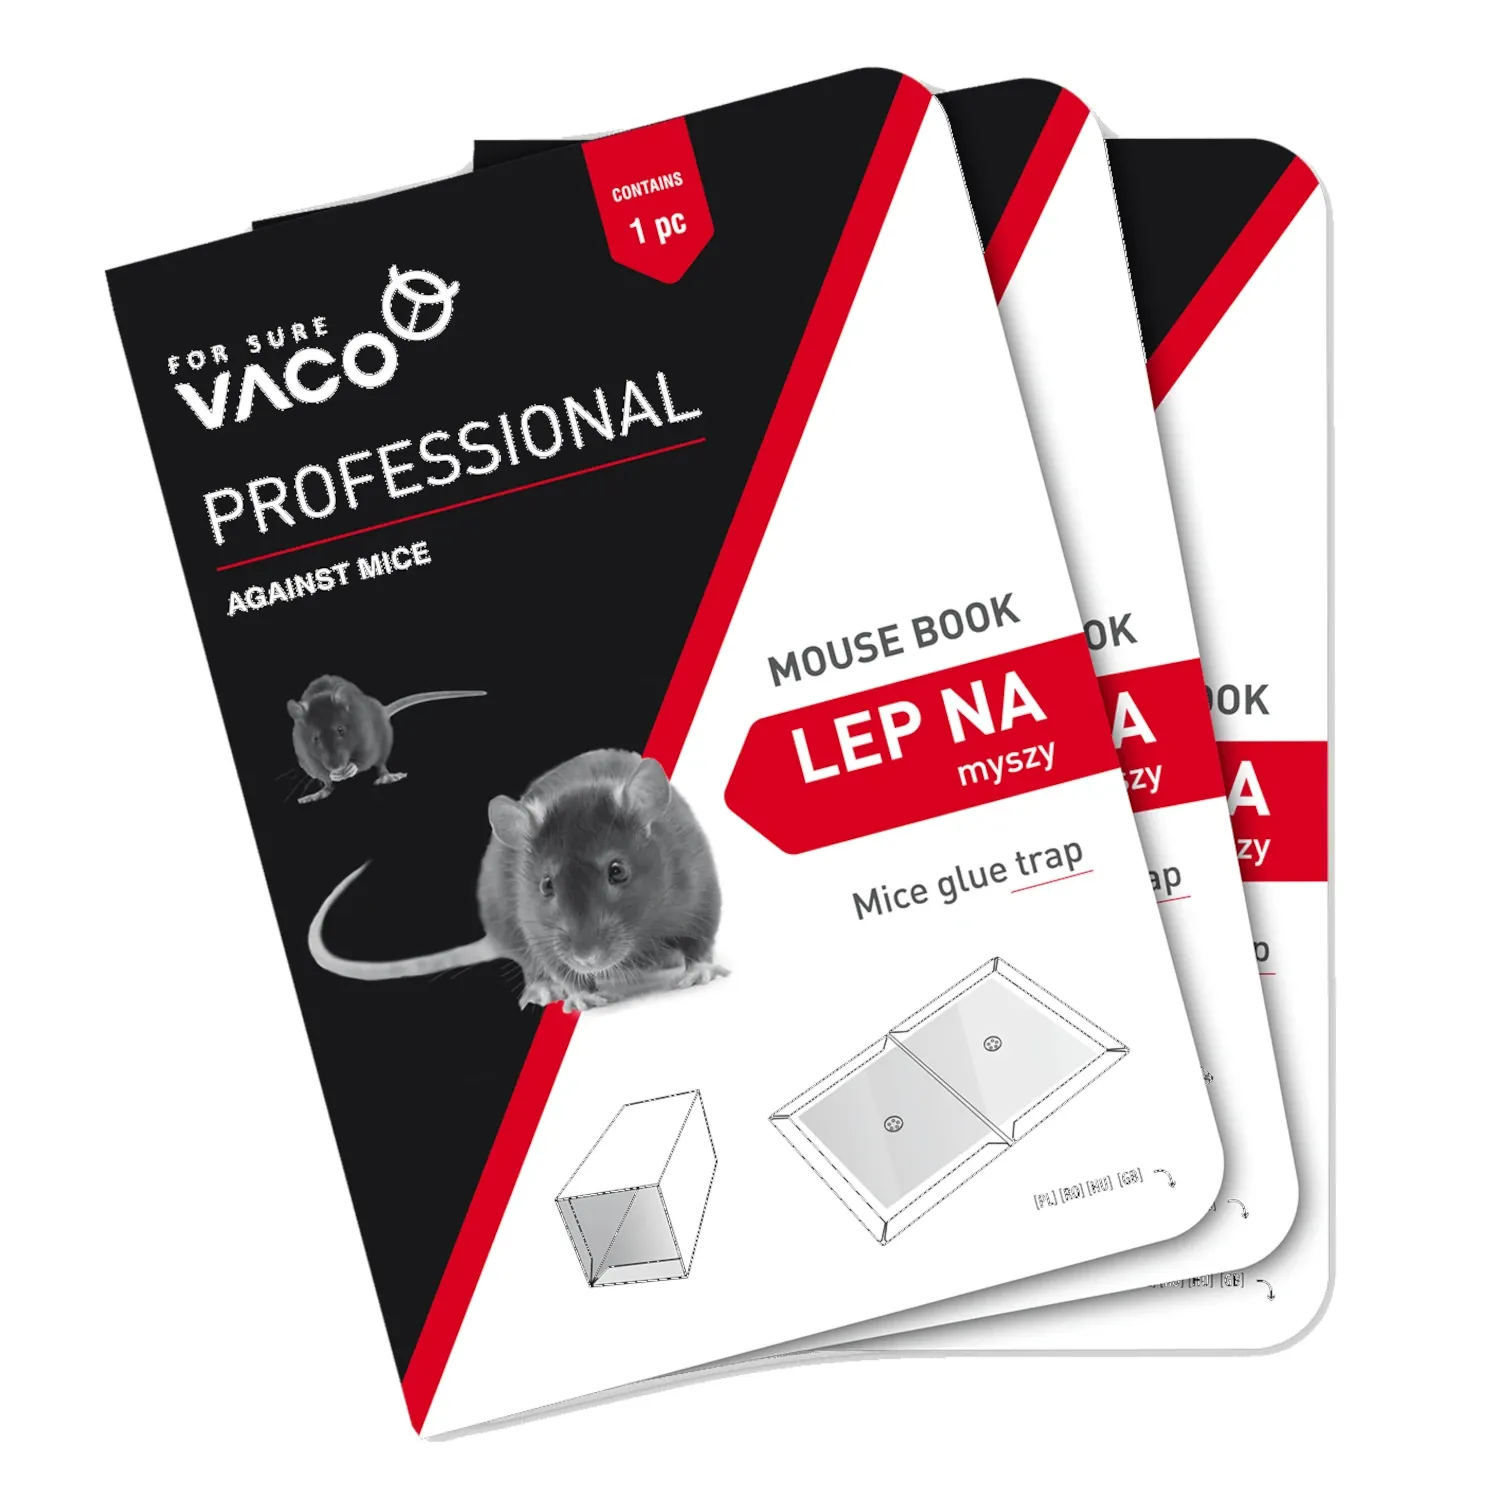 VACO PROFESSIONAL MOUSEBOOK – STICKY TRAP FOR MICE